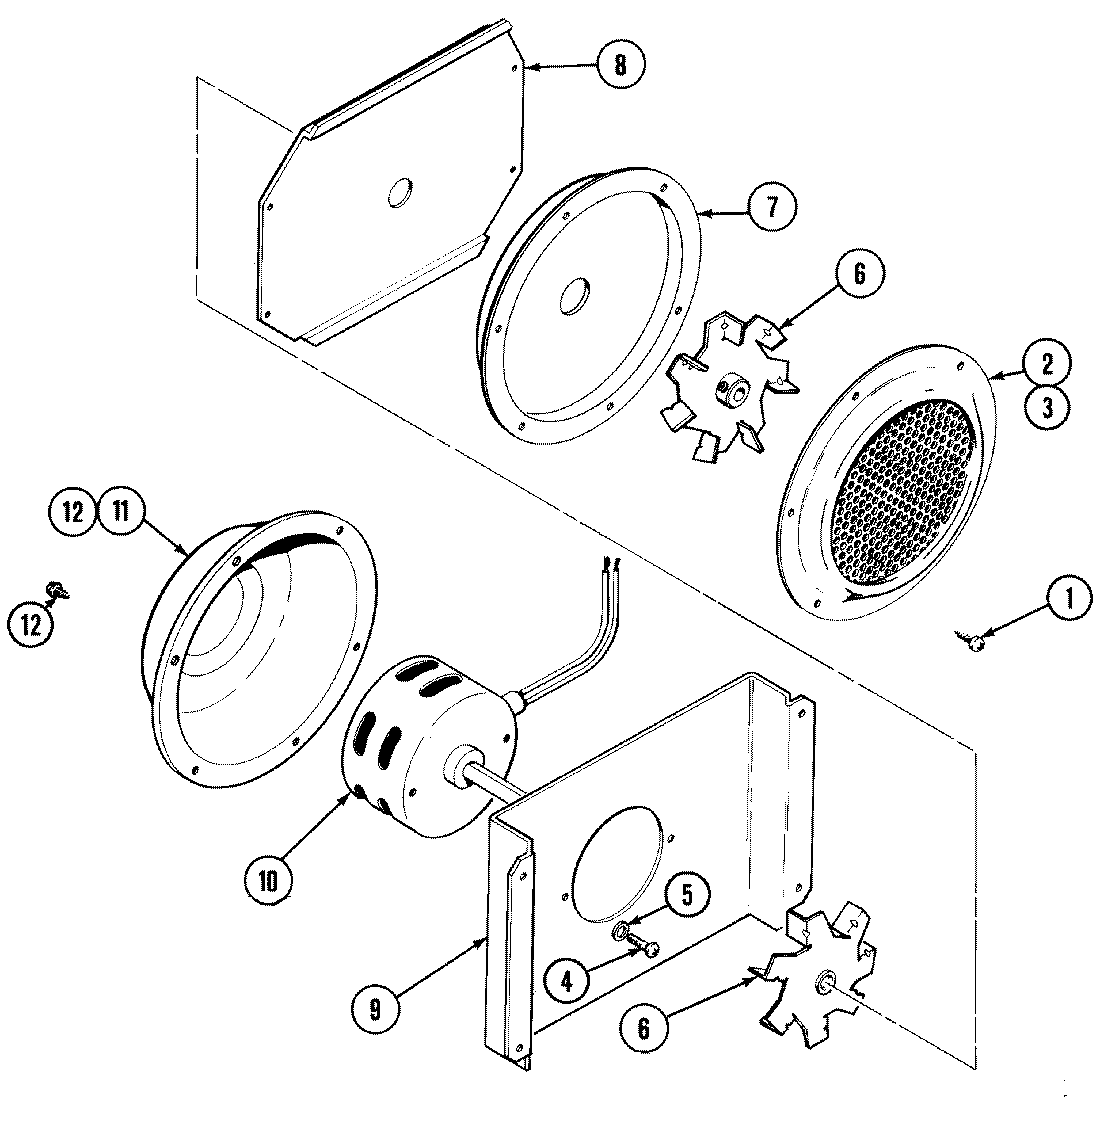 01 - BLOWER MOTOR (CONVECTION)